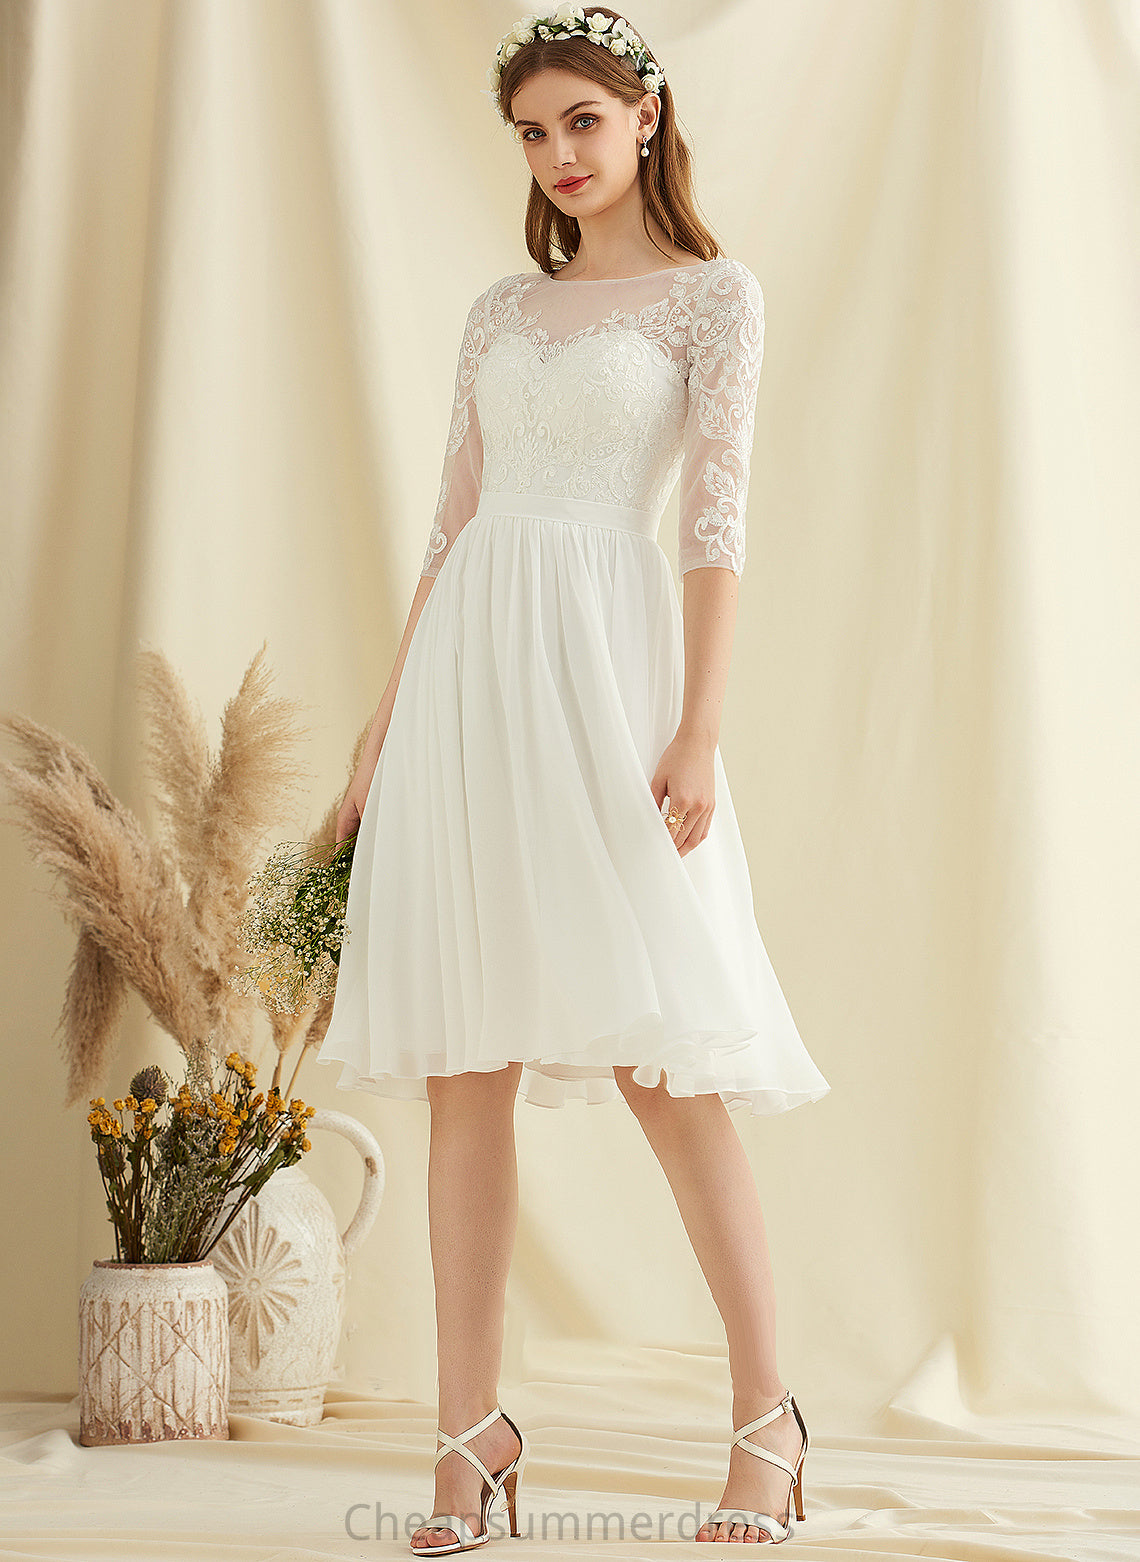 Wedding A-Line Wedding Dresses Chiffon Lucy Lace Sequins With Dress Knee-Length